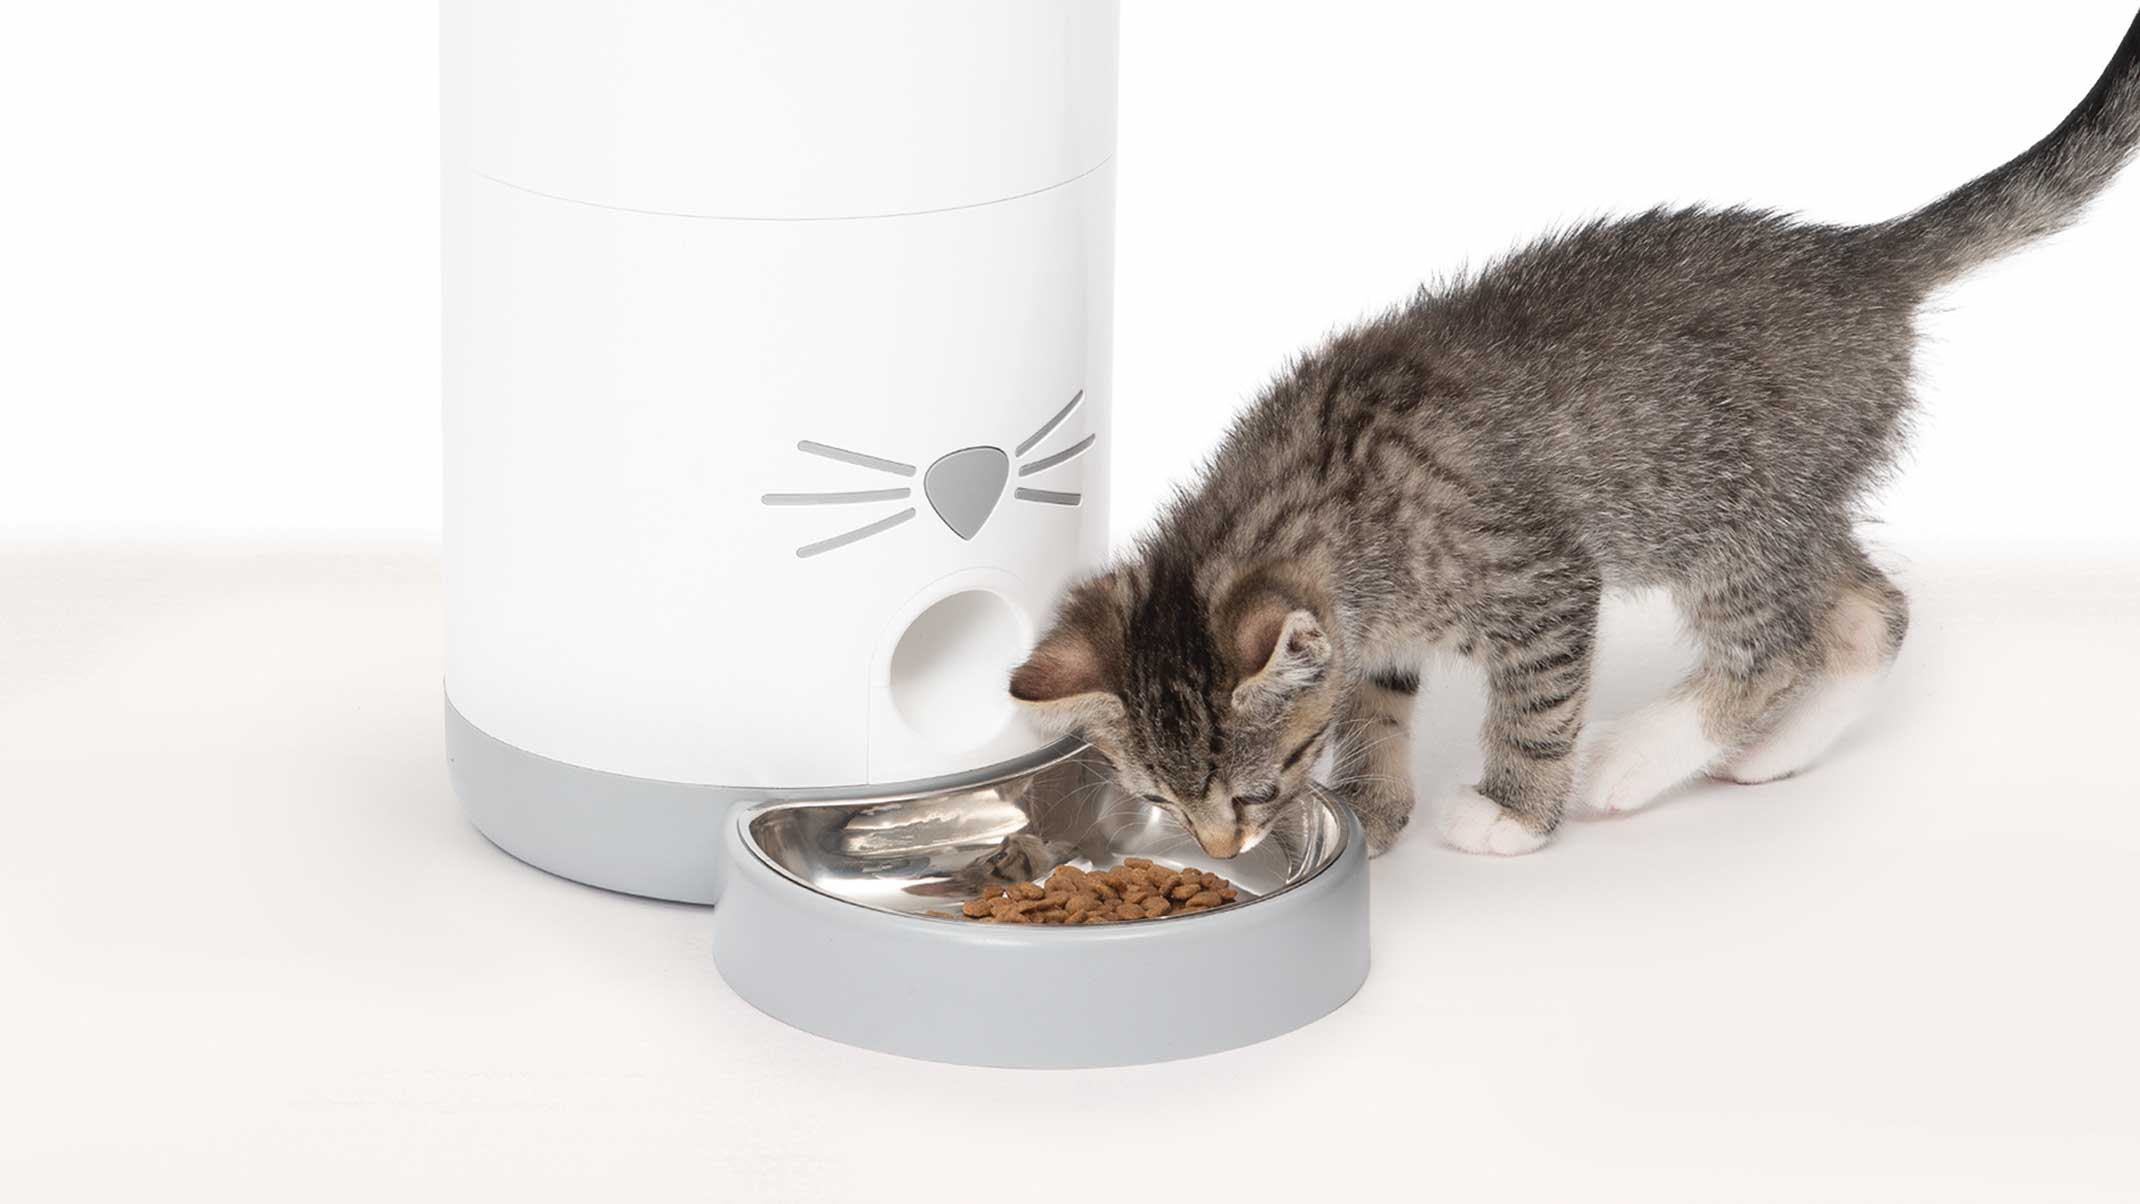 How the Catit PIXI Smart Feeder Changes Your Life